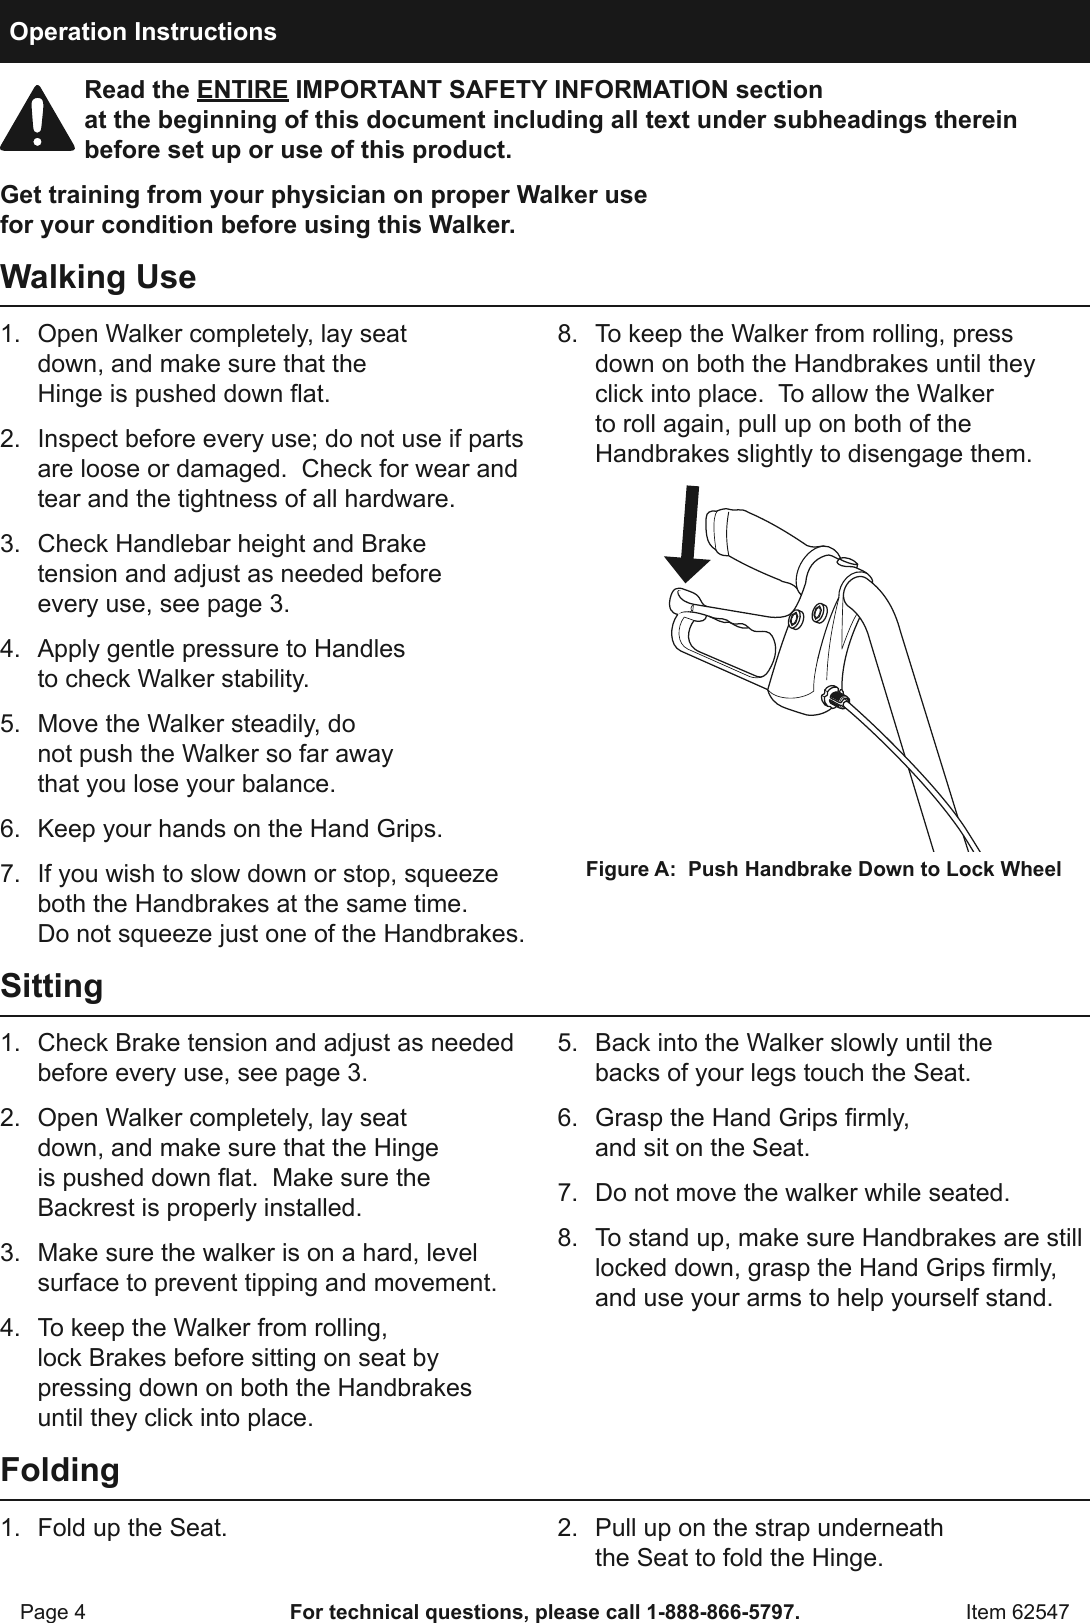 Page 4 of 8 - Manual For The 62547 Sit-or-Stand Behind Rolling Walker